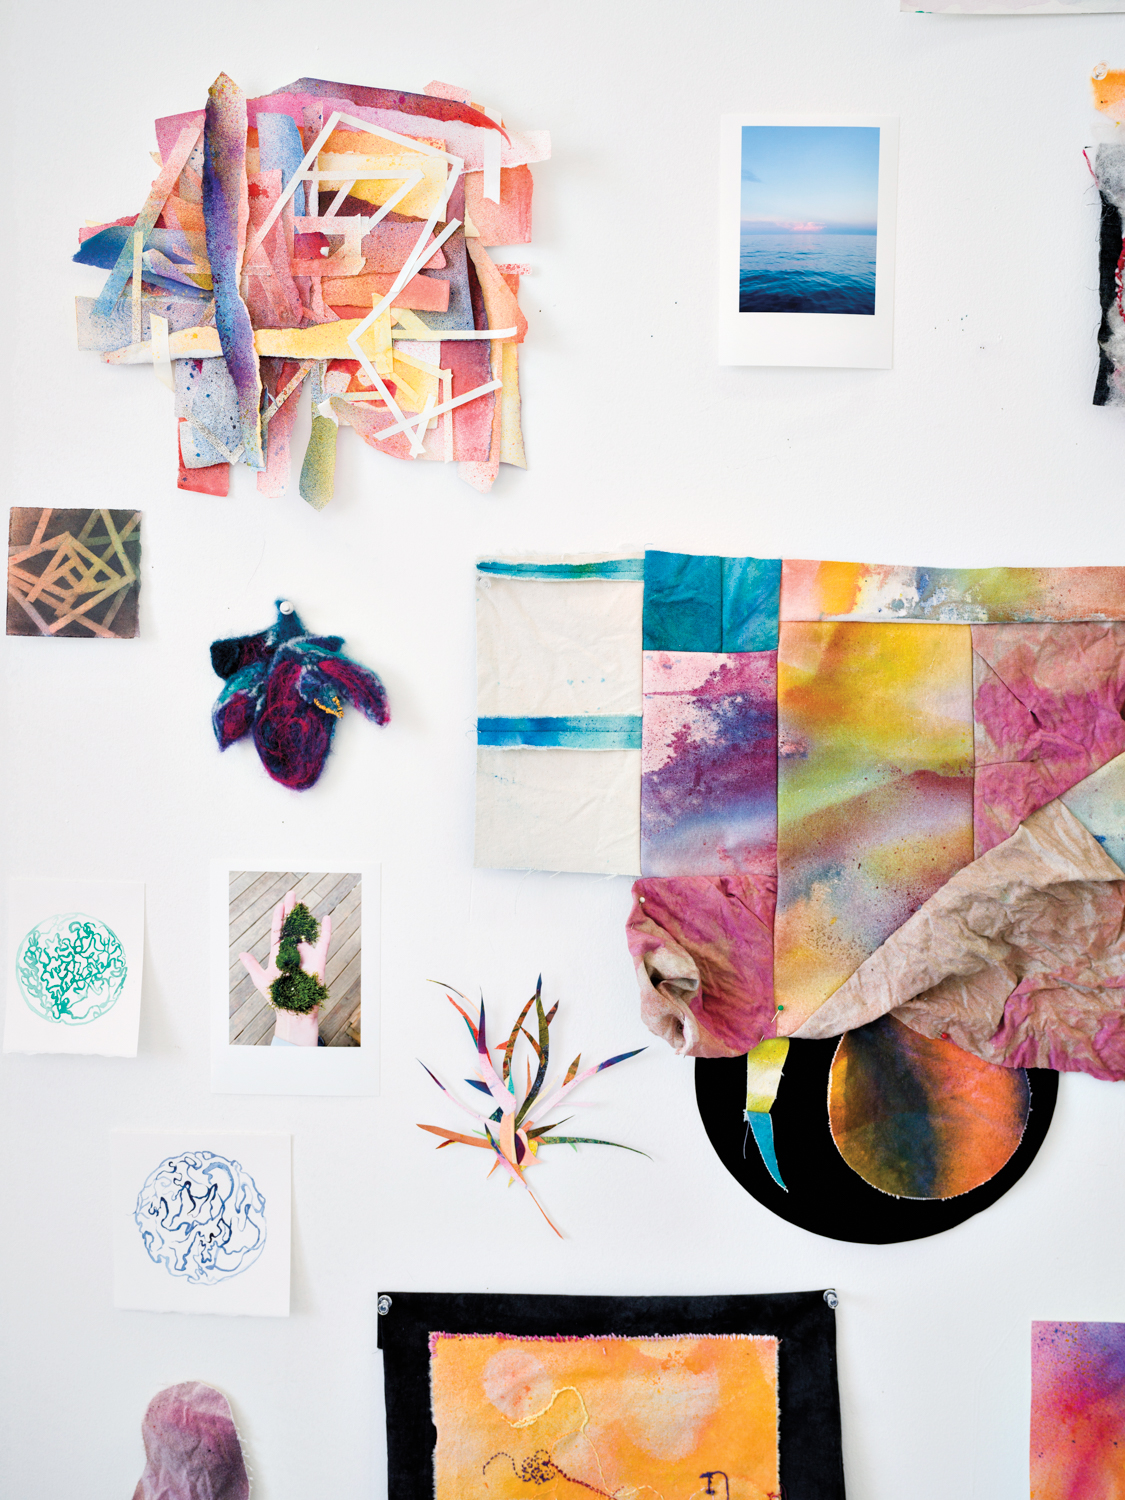 A studio wall with colorful artworks on paper and fabric, and photos from the environment.